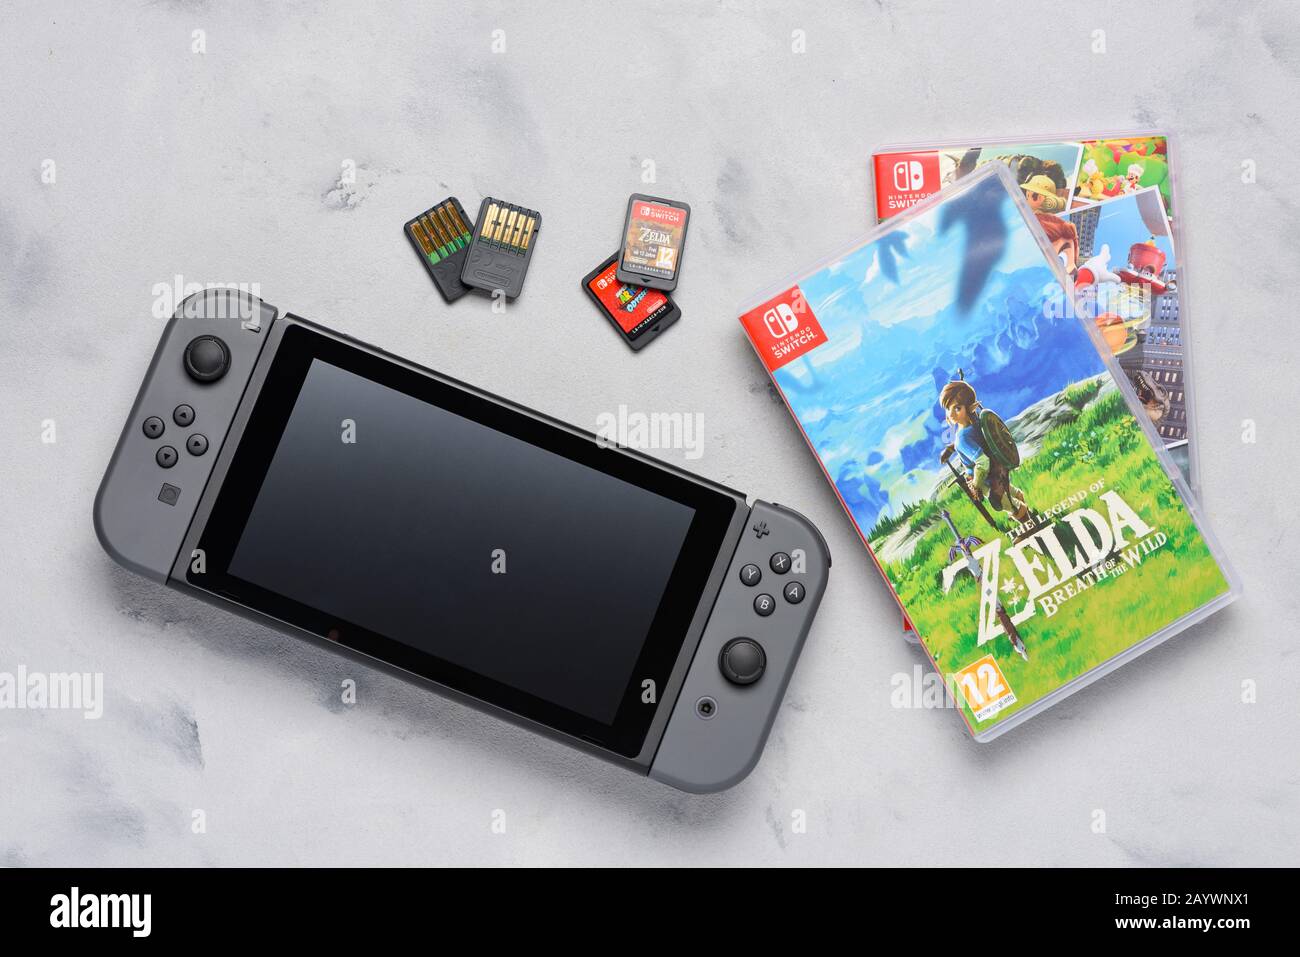 Krakow, Poland - Januray 14, 2020: Nintendo Switch gaming console with  popular Zelda and Mario games and game cards flat lay on table.  Illustrative e Stock Photo - Alamy